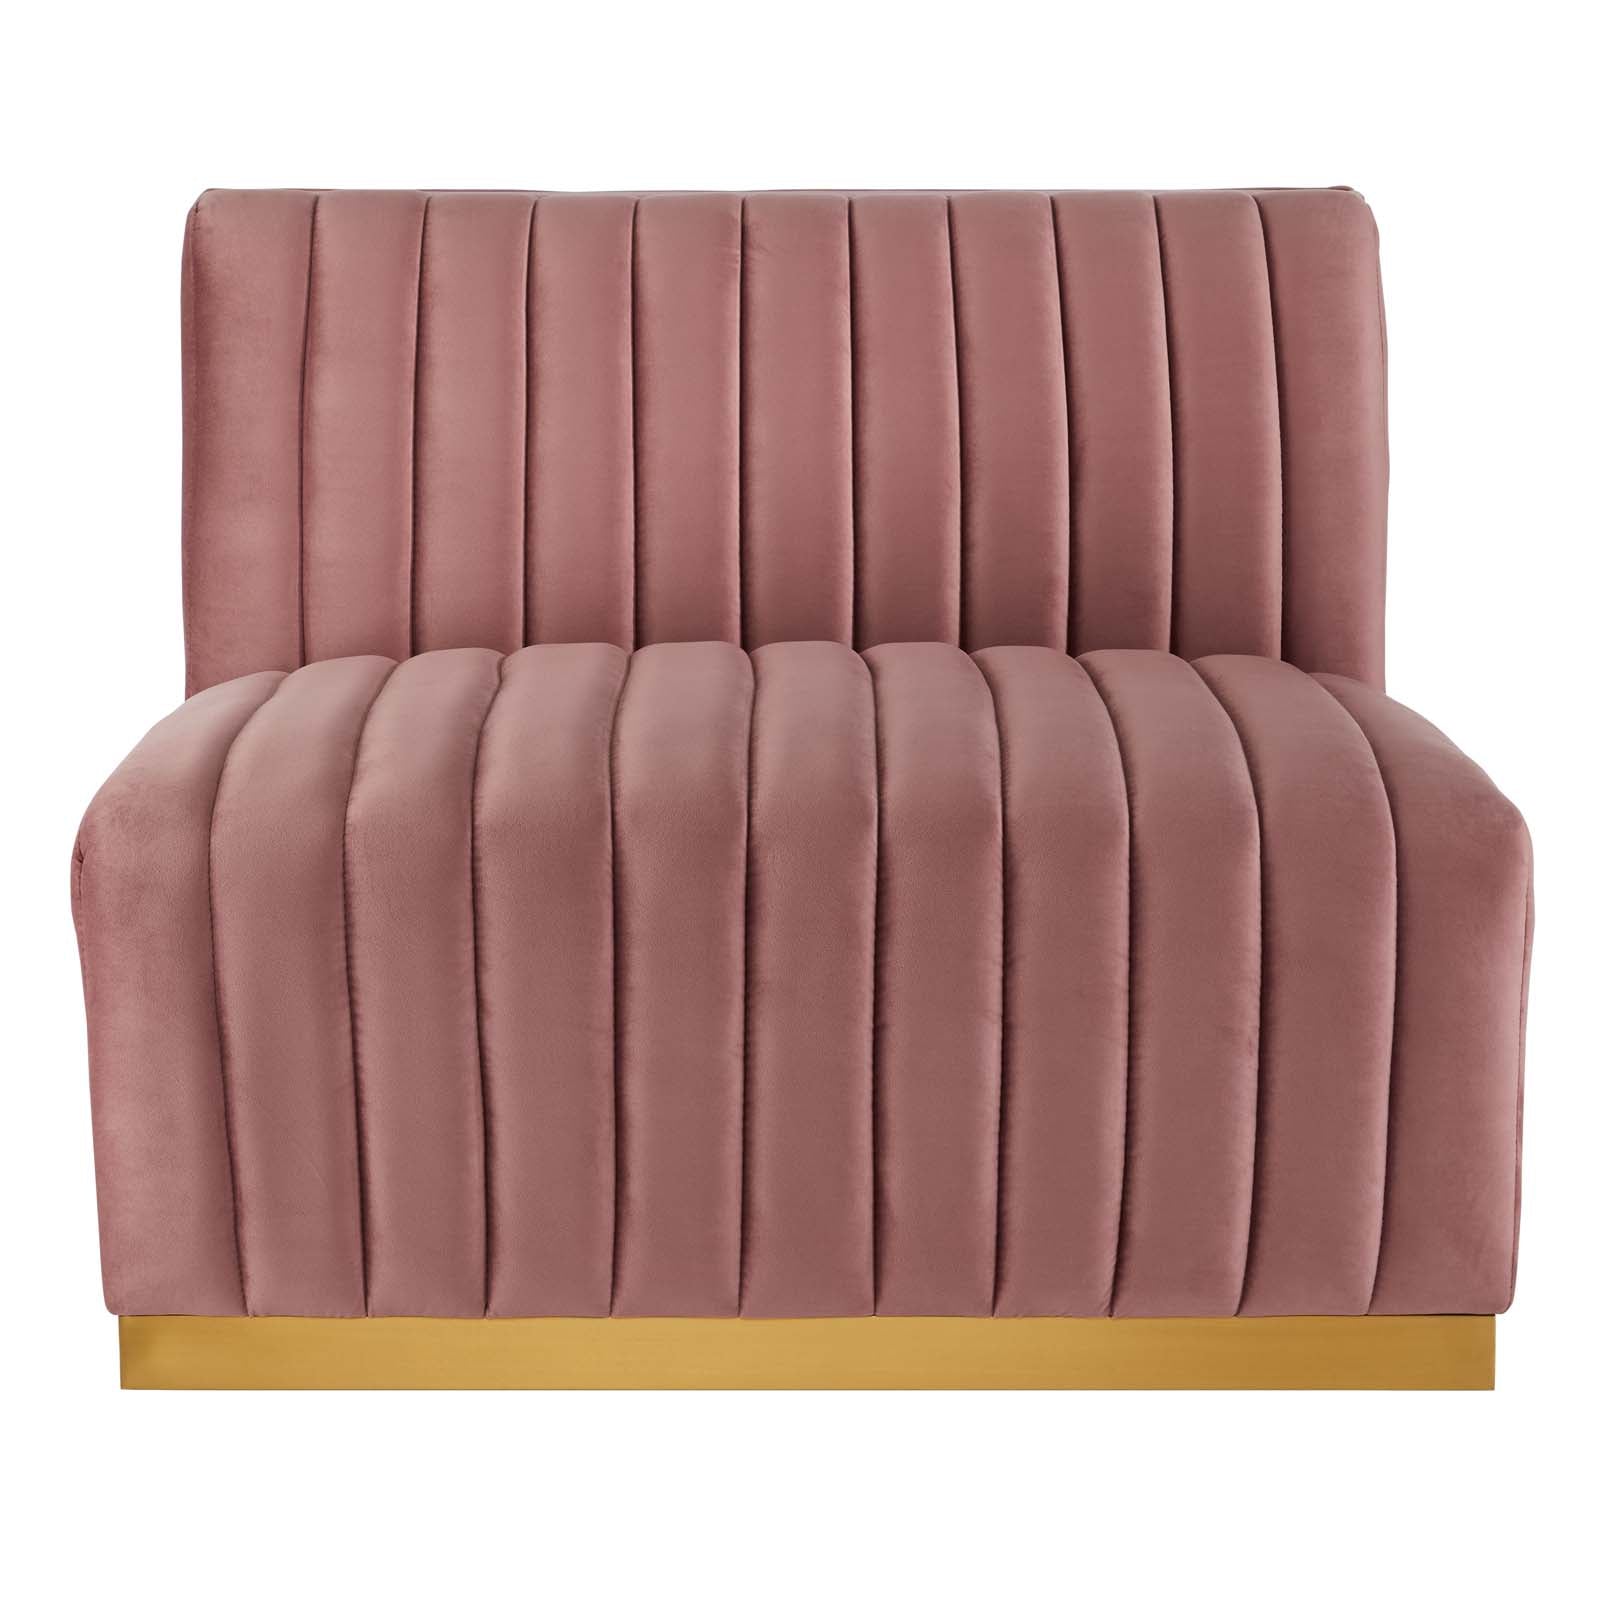 Modway Sectional Sofas - Conjure Tufted Performance Velvet 4 Piece Sectional Gold | Dusty Rose